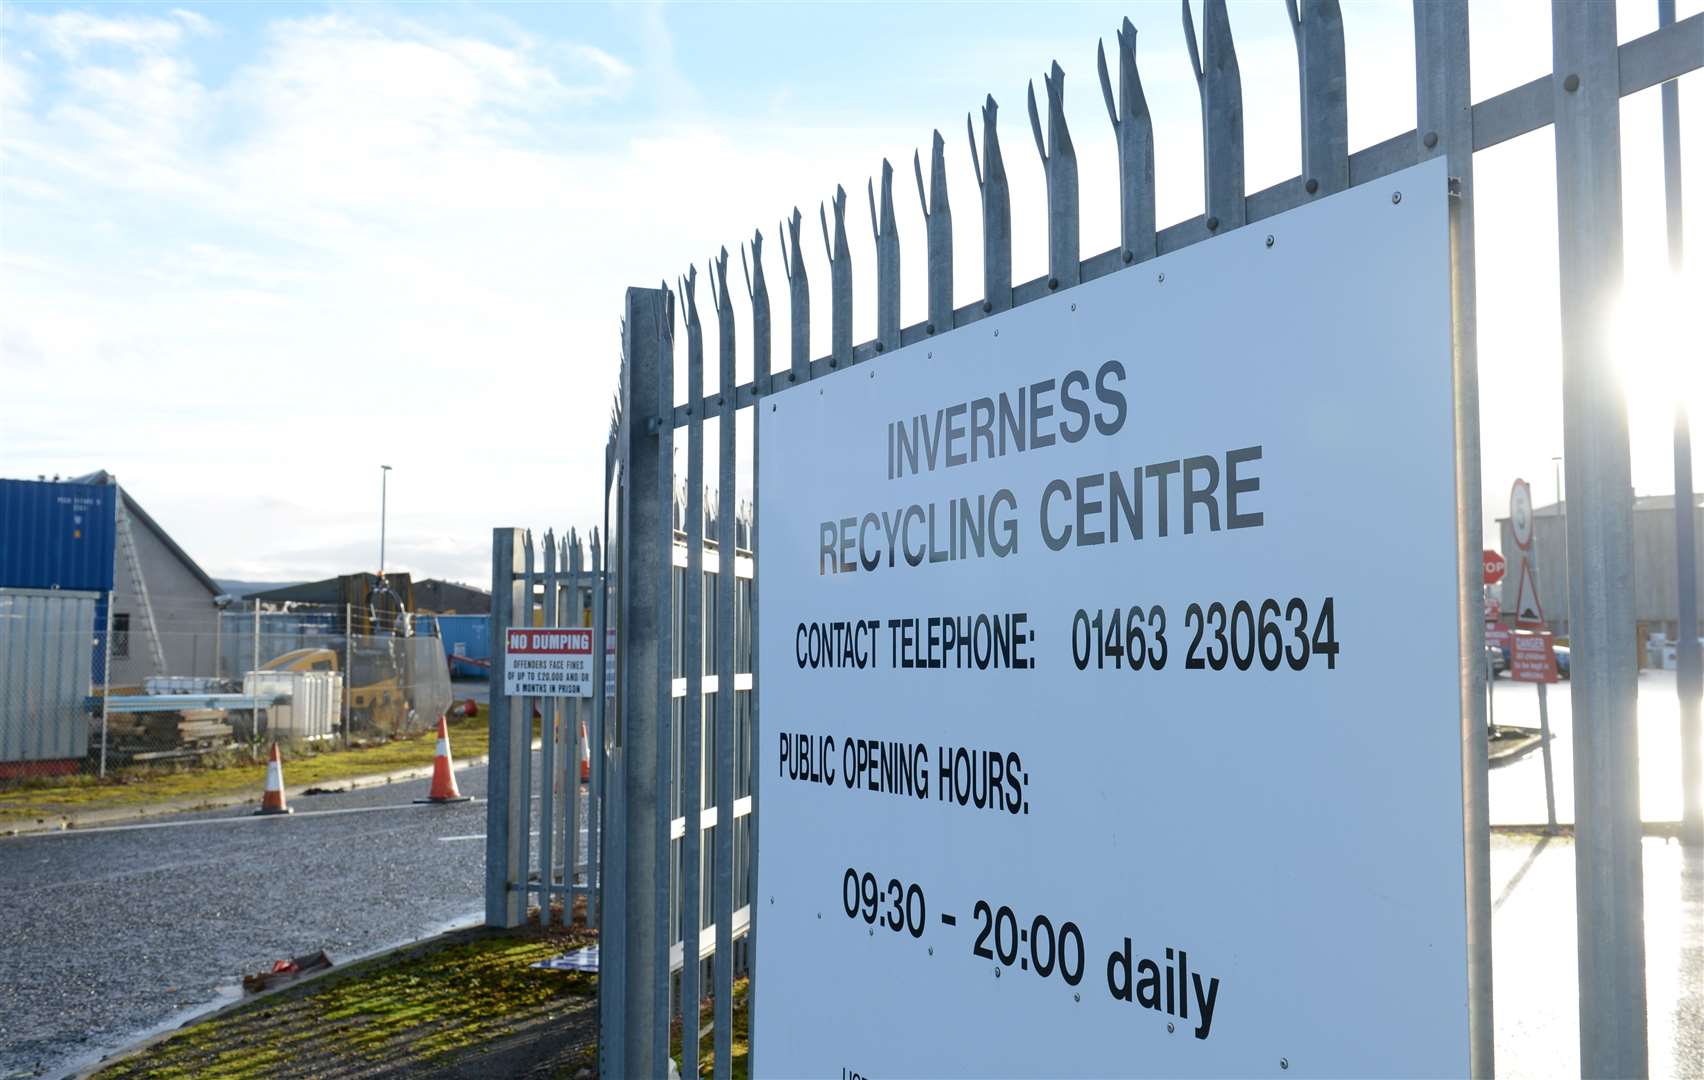 Inverness Recycling Centre.